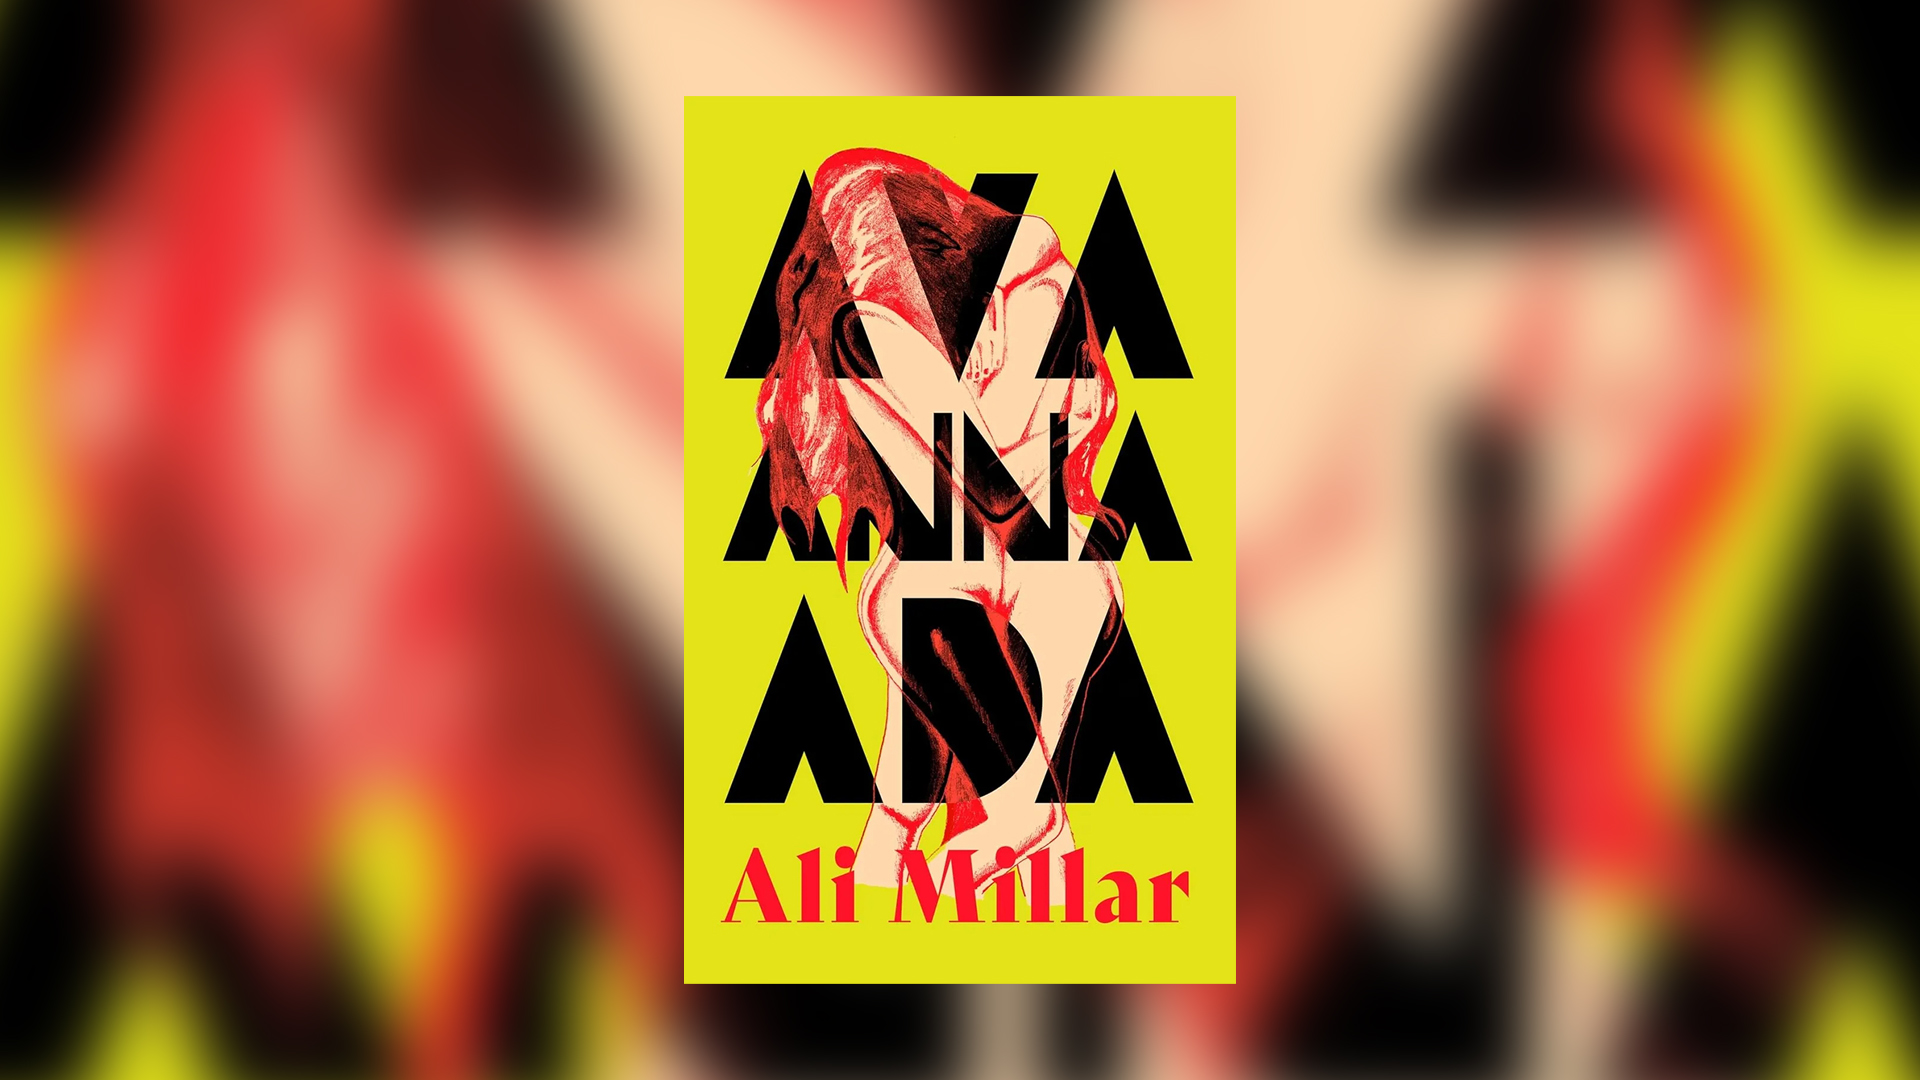 Ava Anna Ada by Ali Millar review – the apocalyptic age of anxiety ...